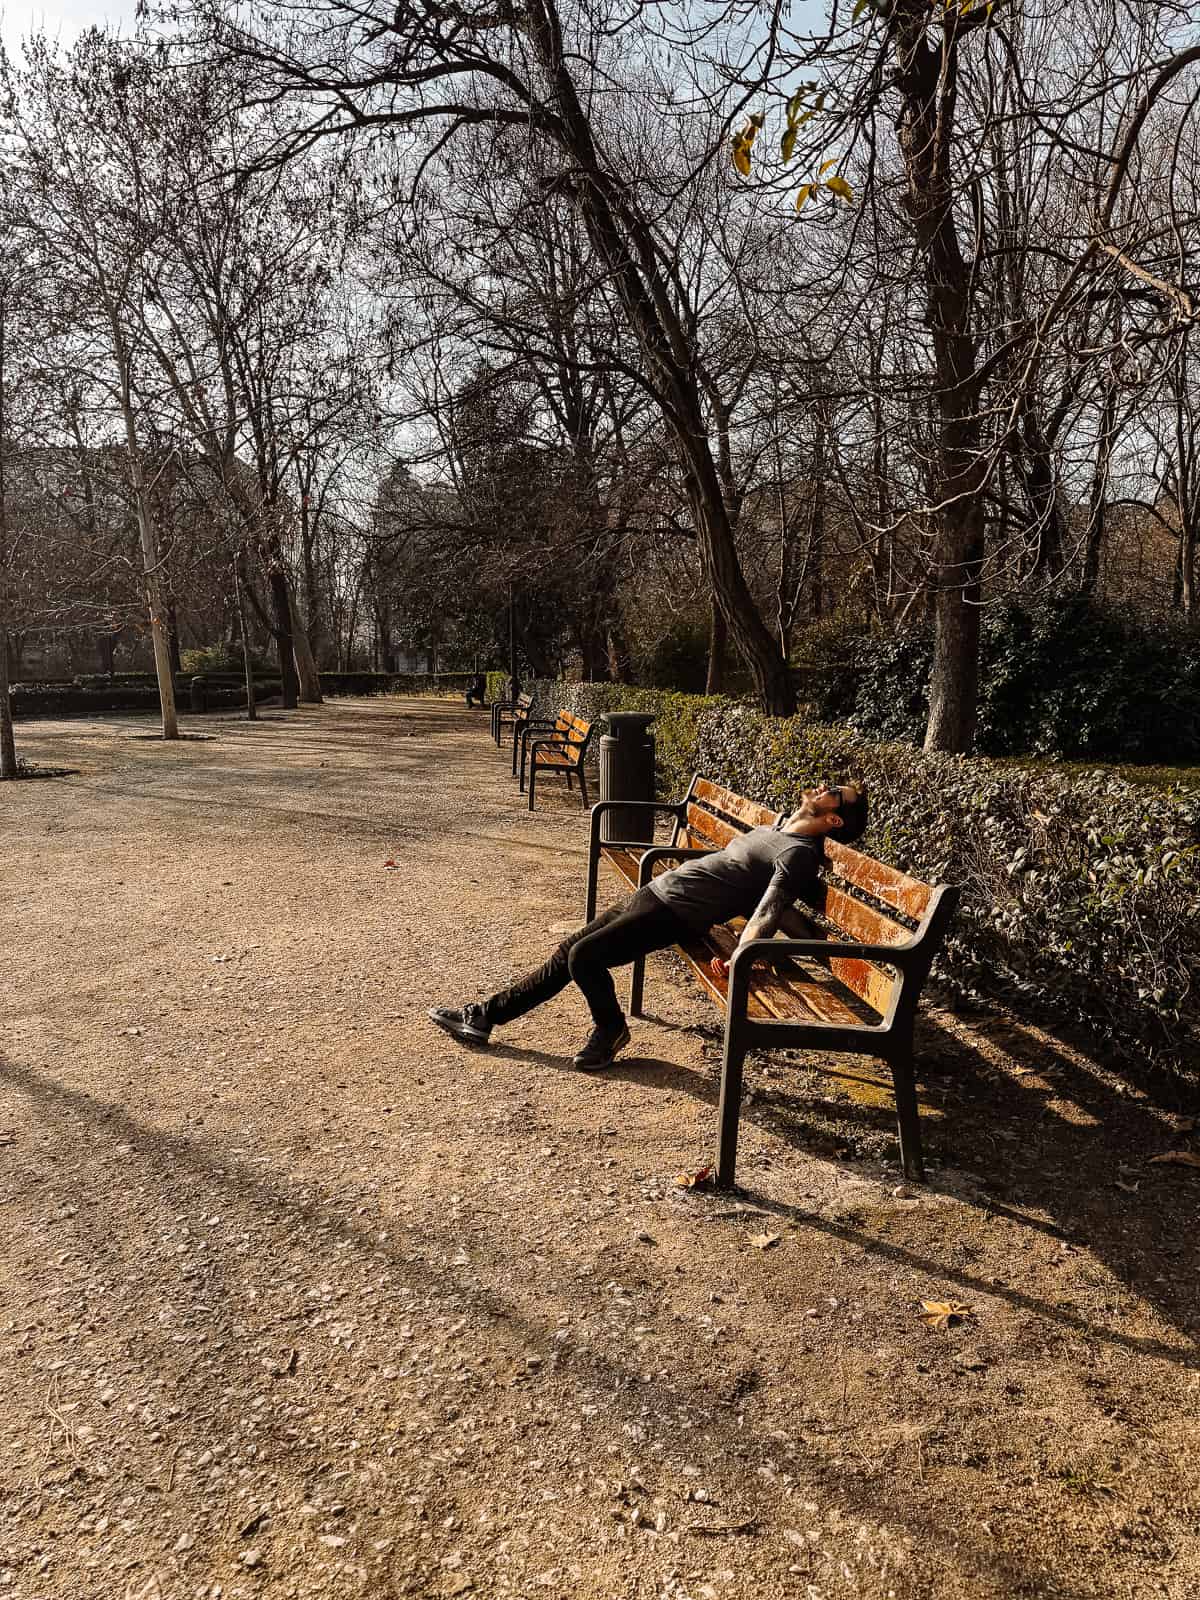 A solitary figure reclines on a park bench, soaking in the tranquility of a sun-dappled path lined with bare trees, capturing a moment of peaceful solitude in a city park